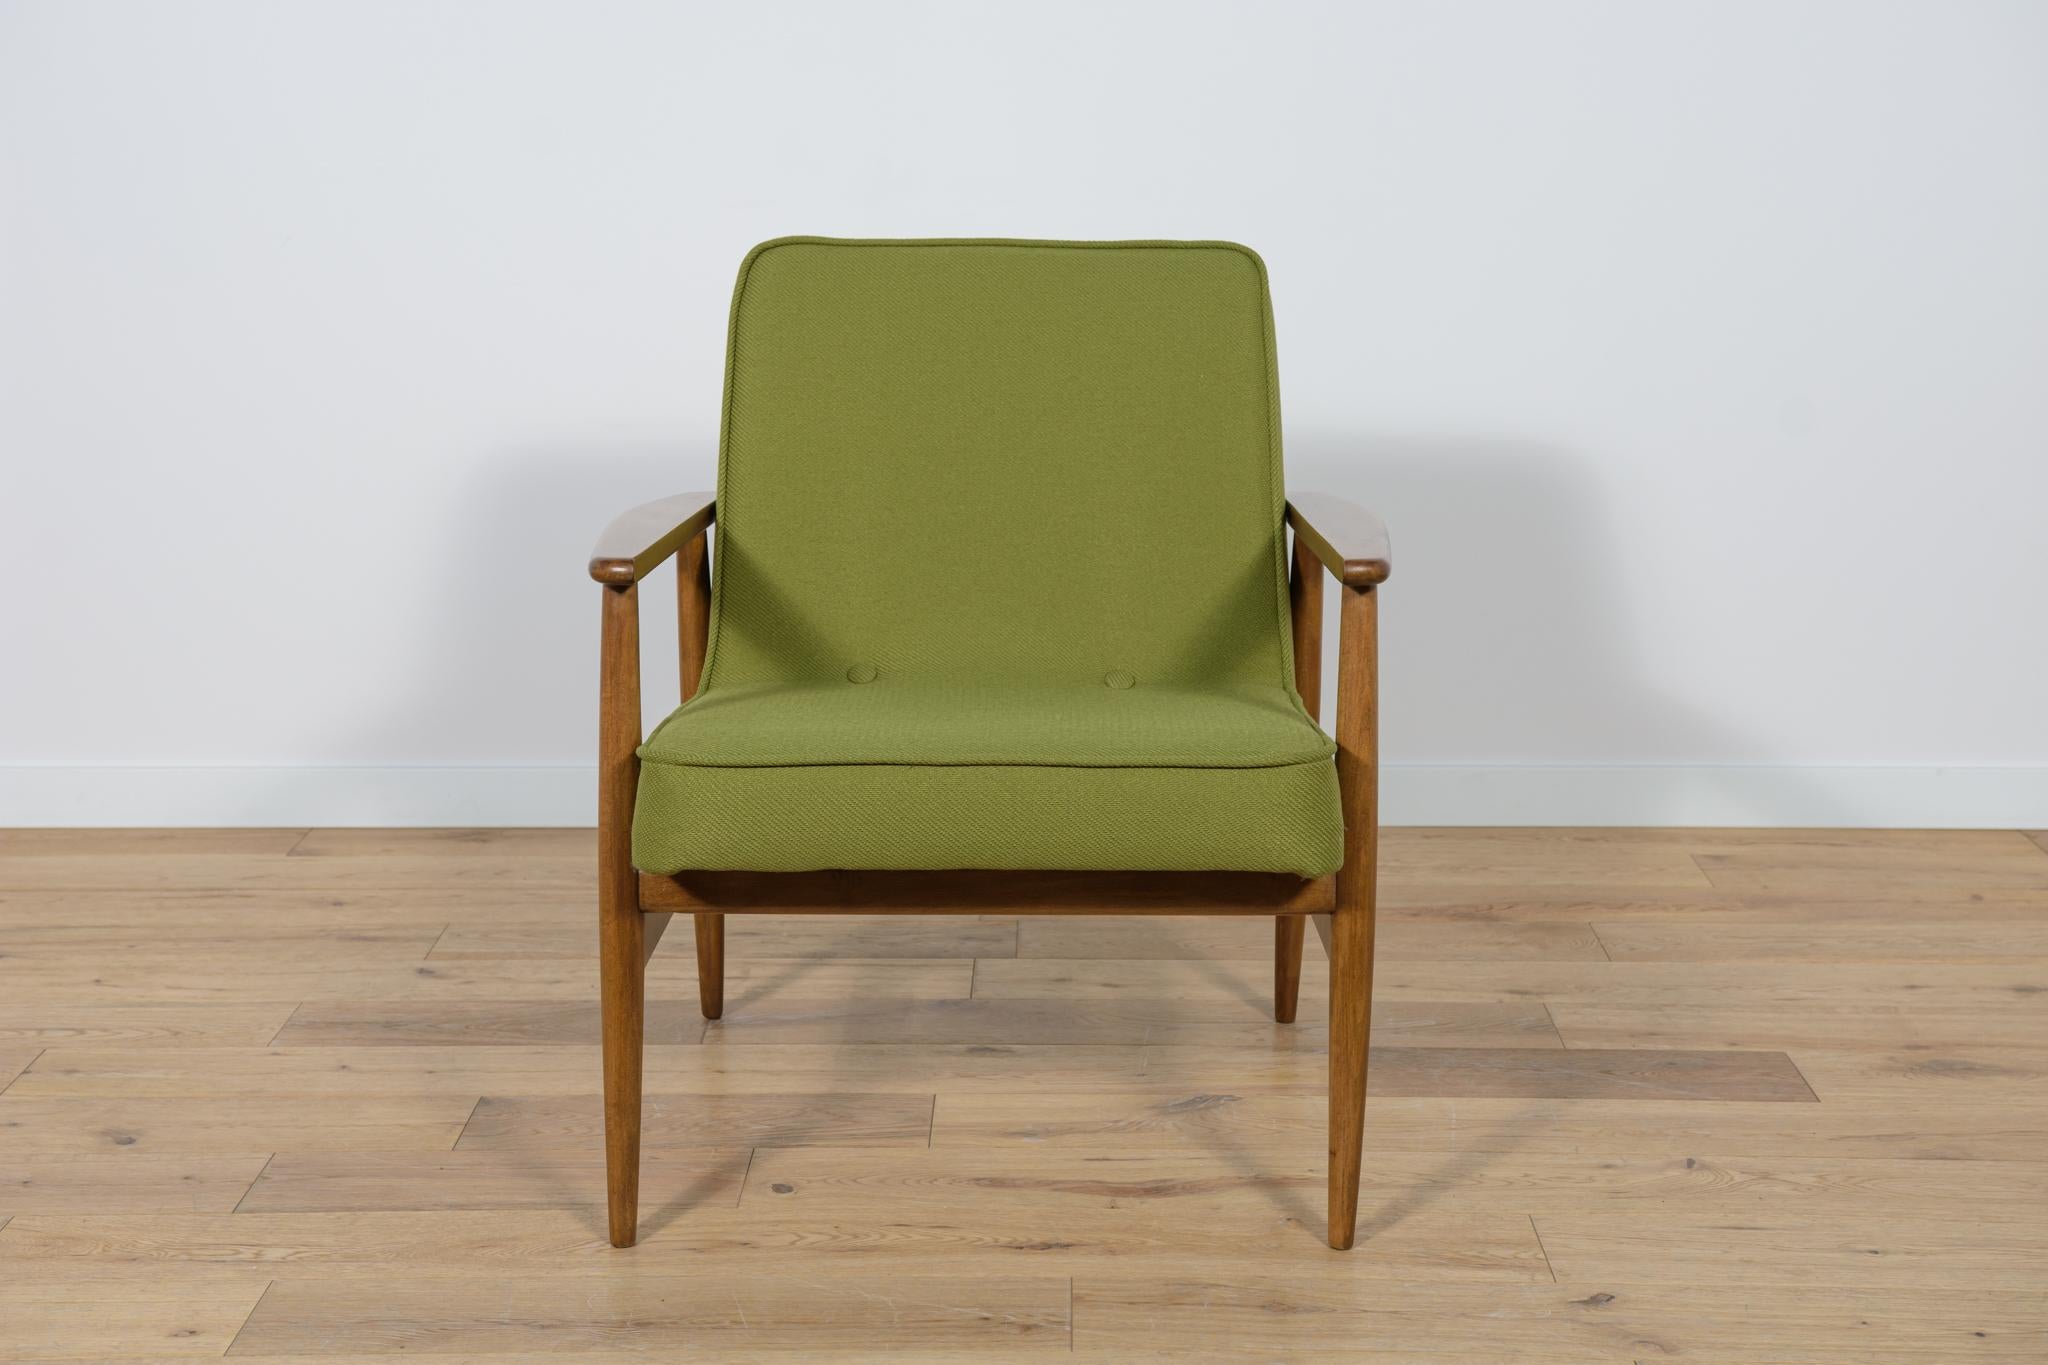 Armchair Type 300-192  designed by Juliusz Kędziorek for Gościcińska Furniture Factory  in Poland on the early 1970s.
The armchair have undergone professional carpentry and upholstery renovation. The beech wood was cleaned of the old surface,